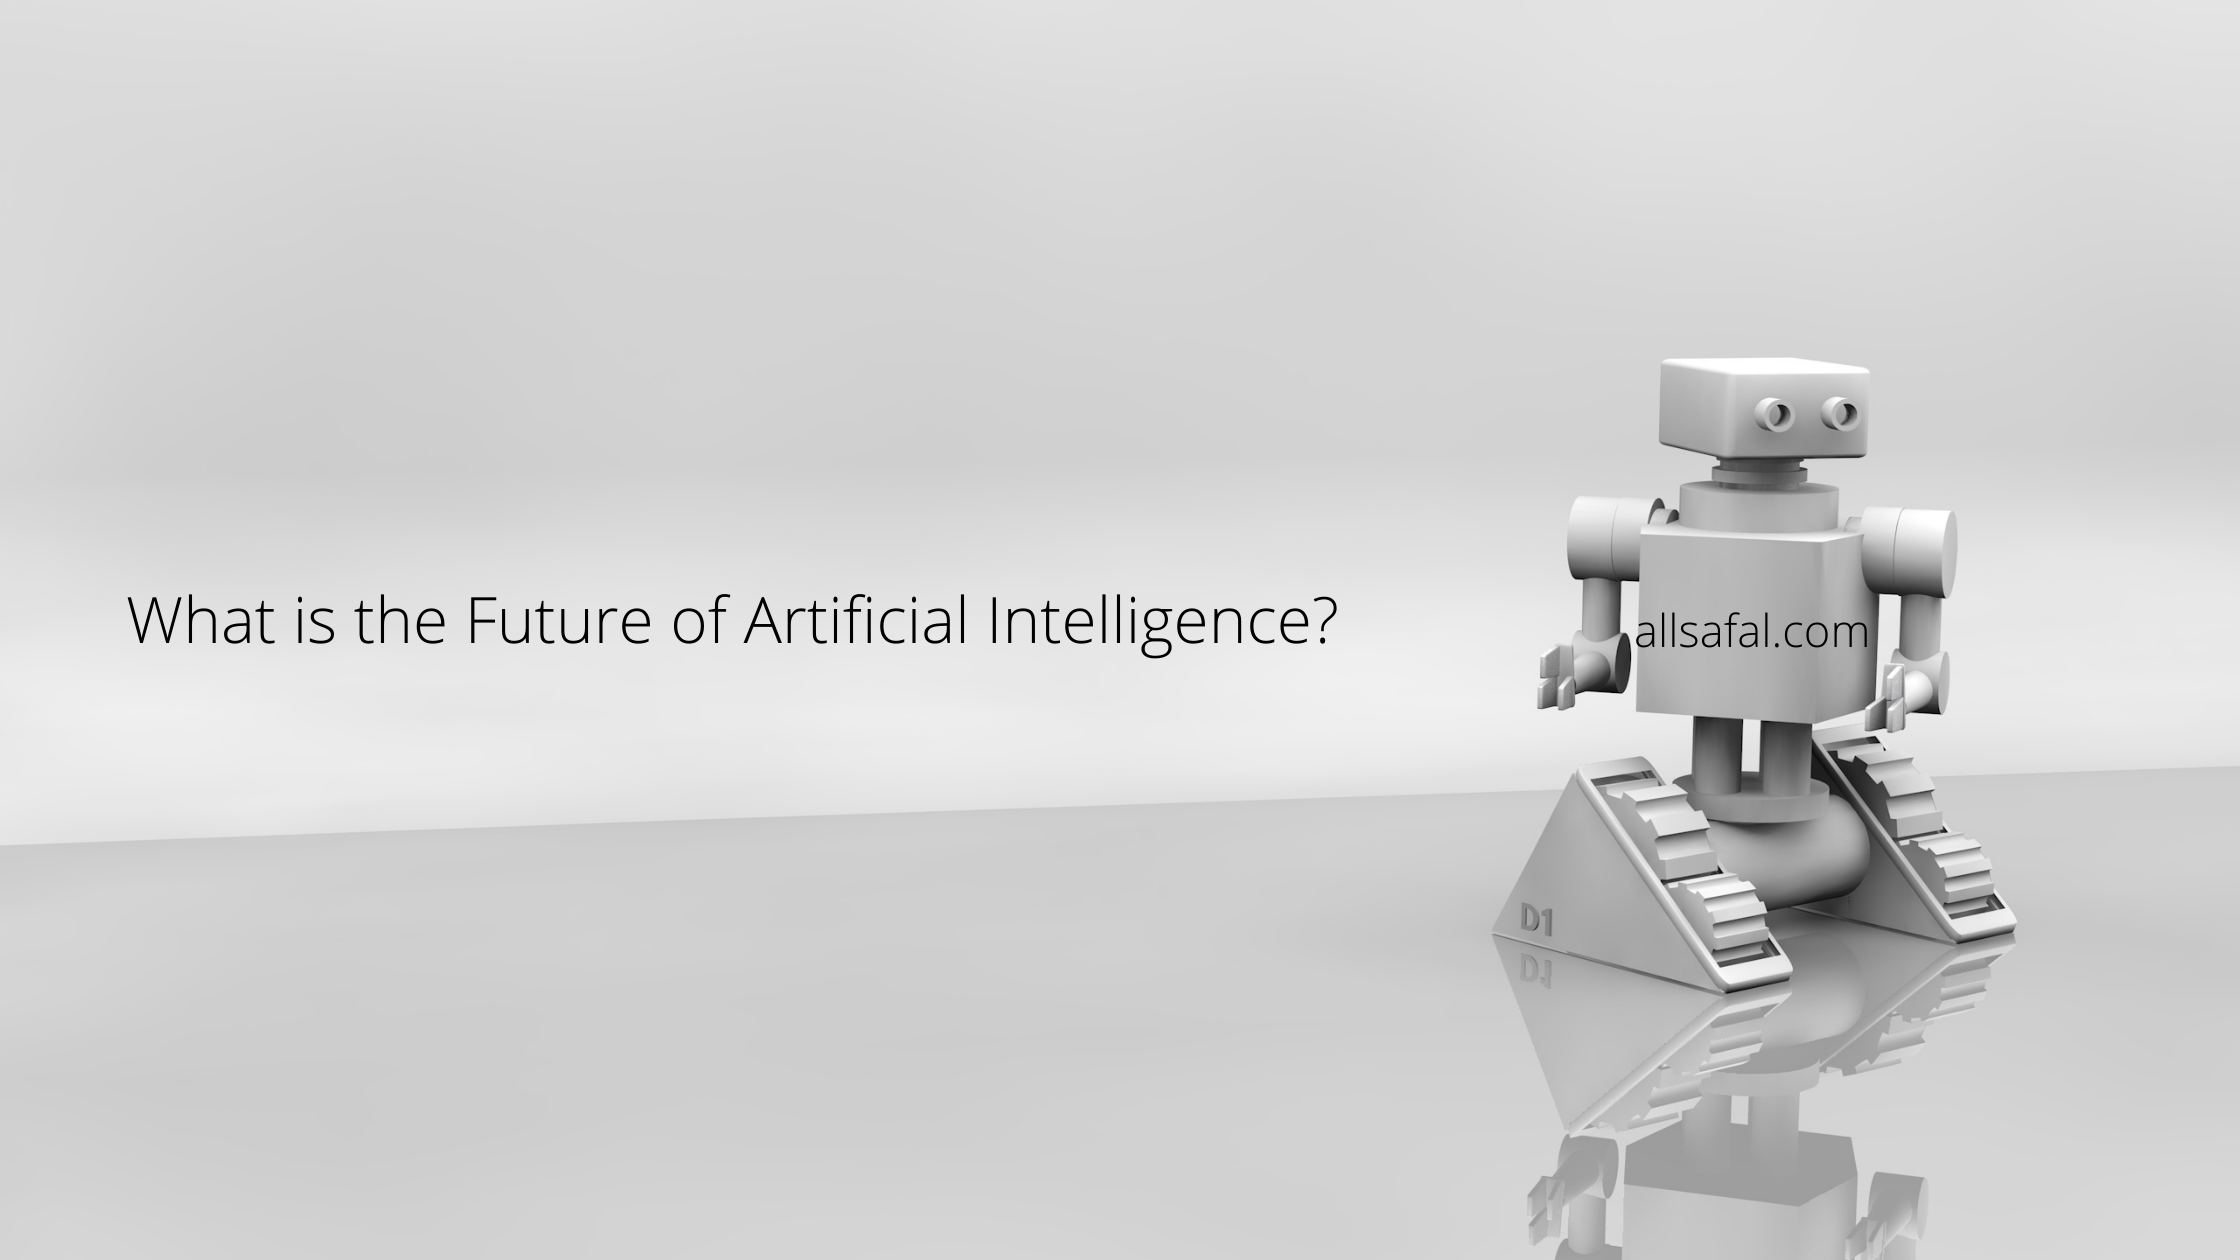 What is the Future of Artificial Intelligence?